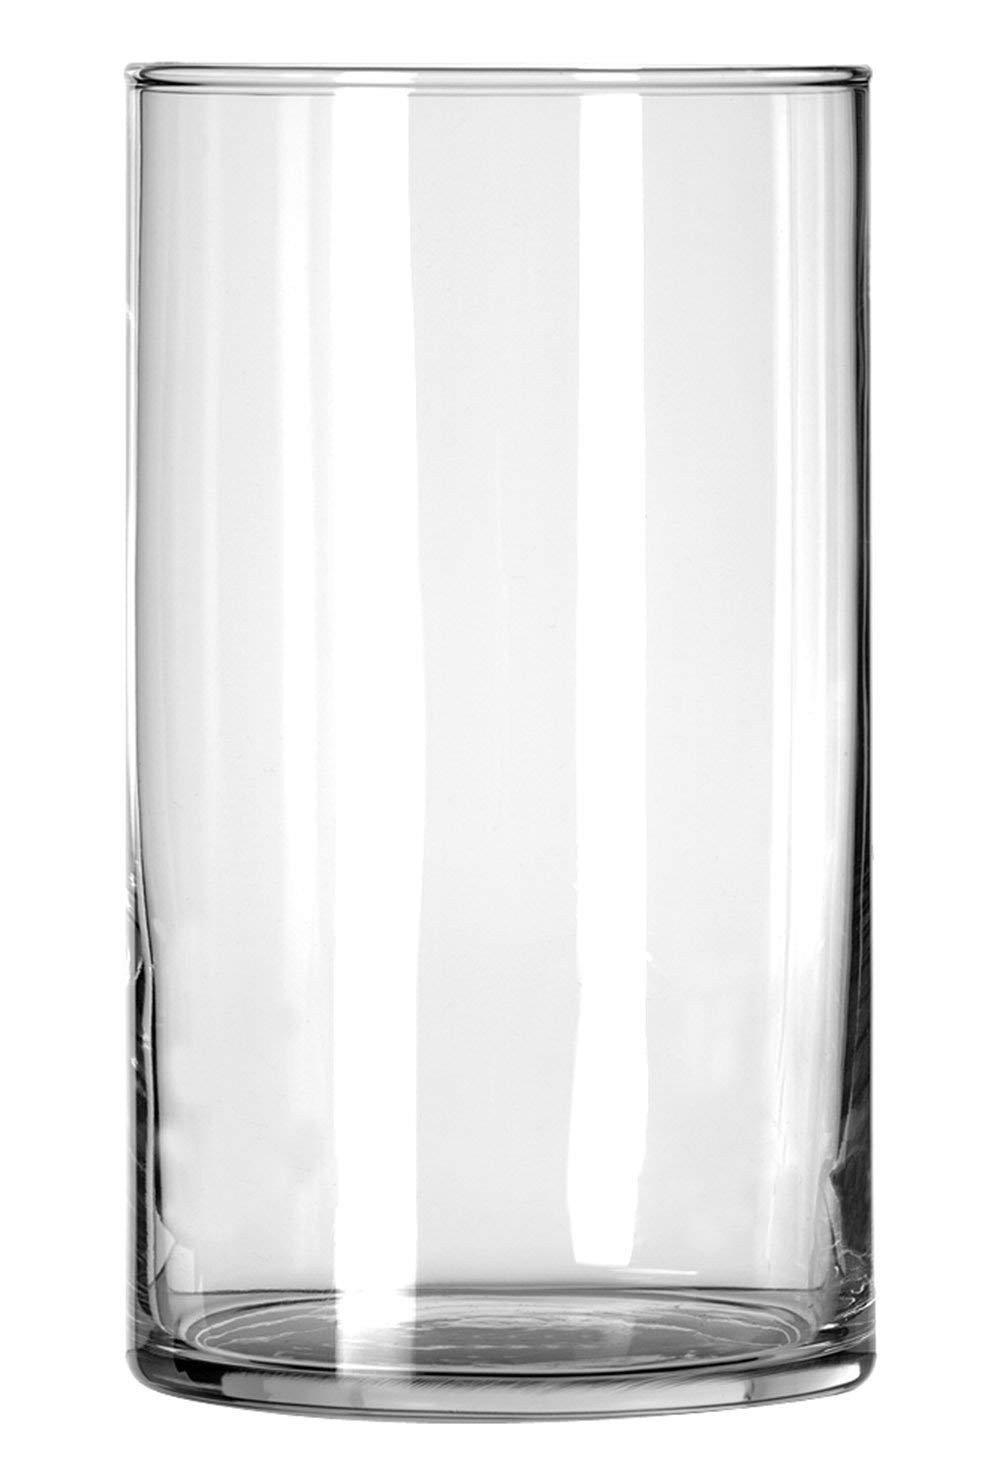 libbey clear cylinder bud vase of clear glass cylinder vases pandoraocharms us with clear glass cylinder vases amazon com libbey vase 6 inch set of 12